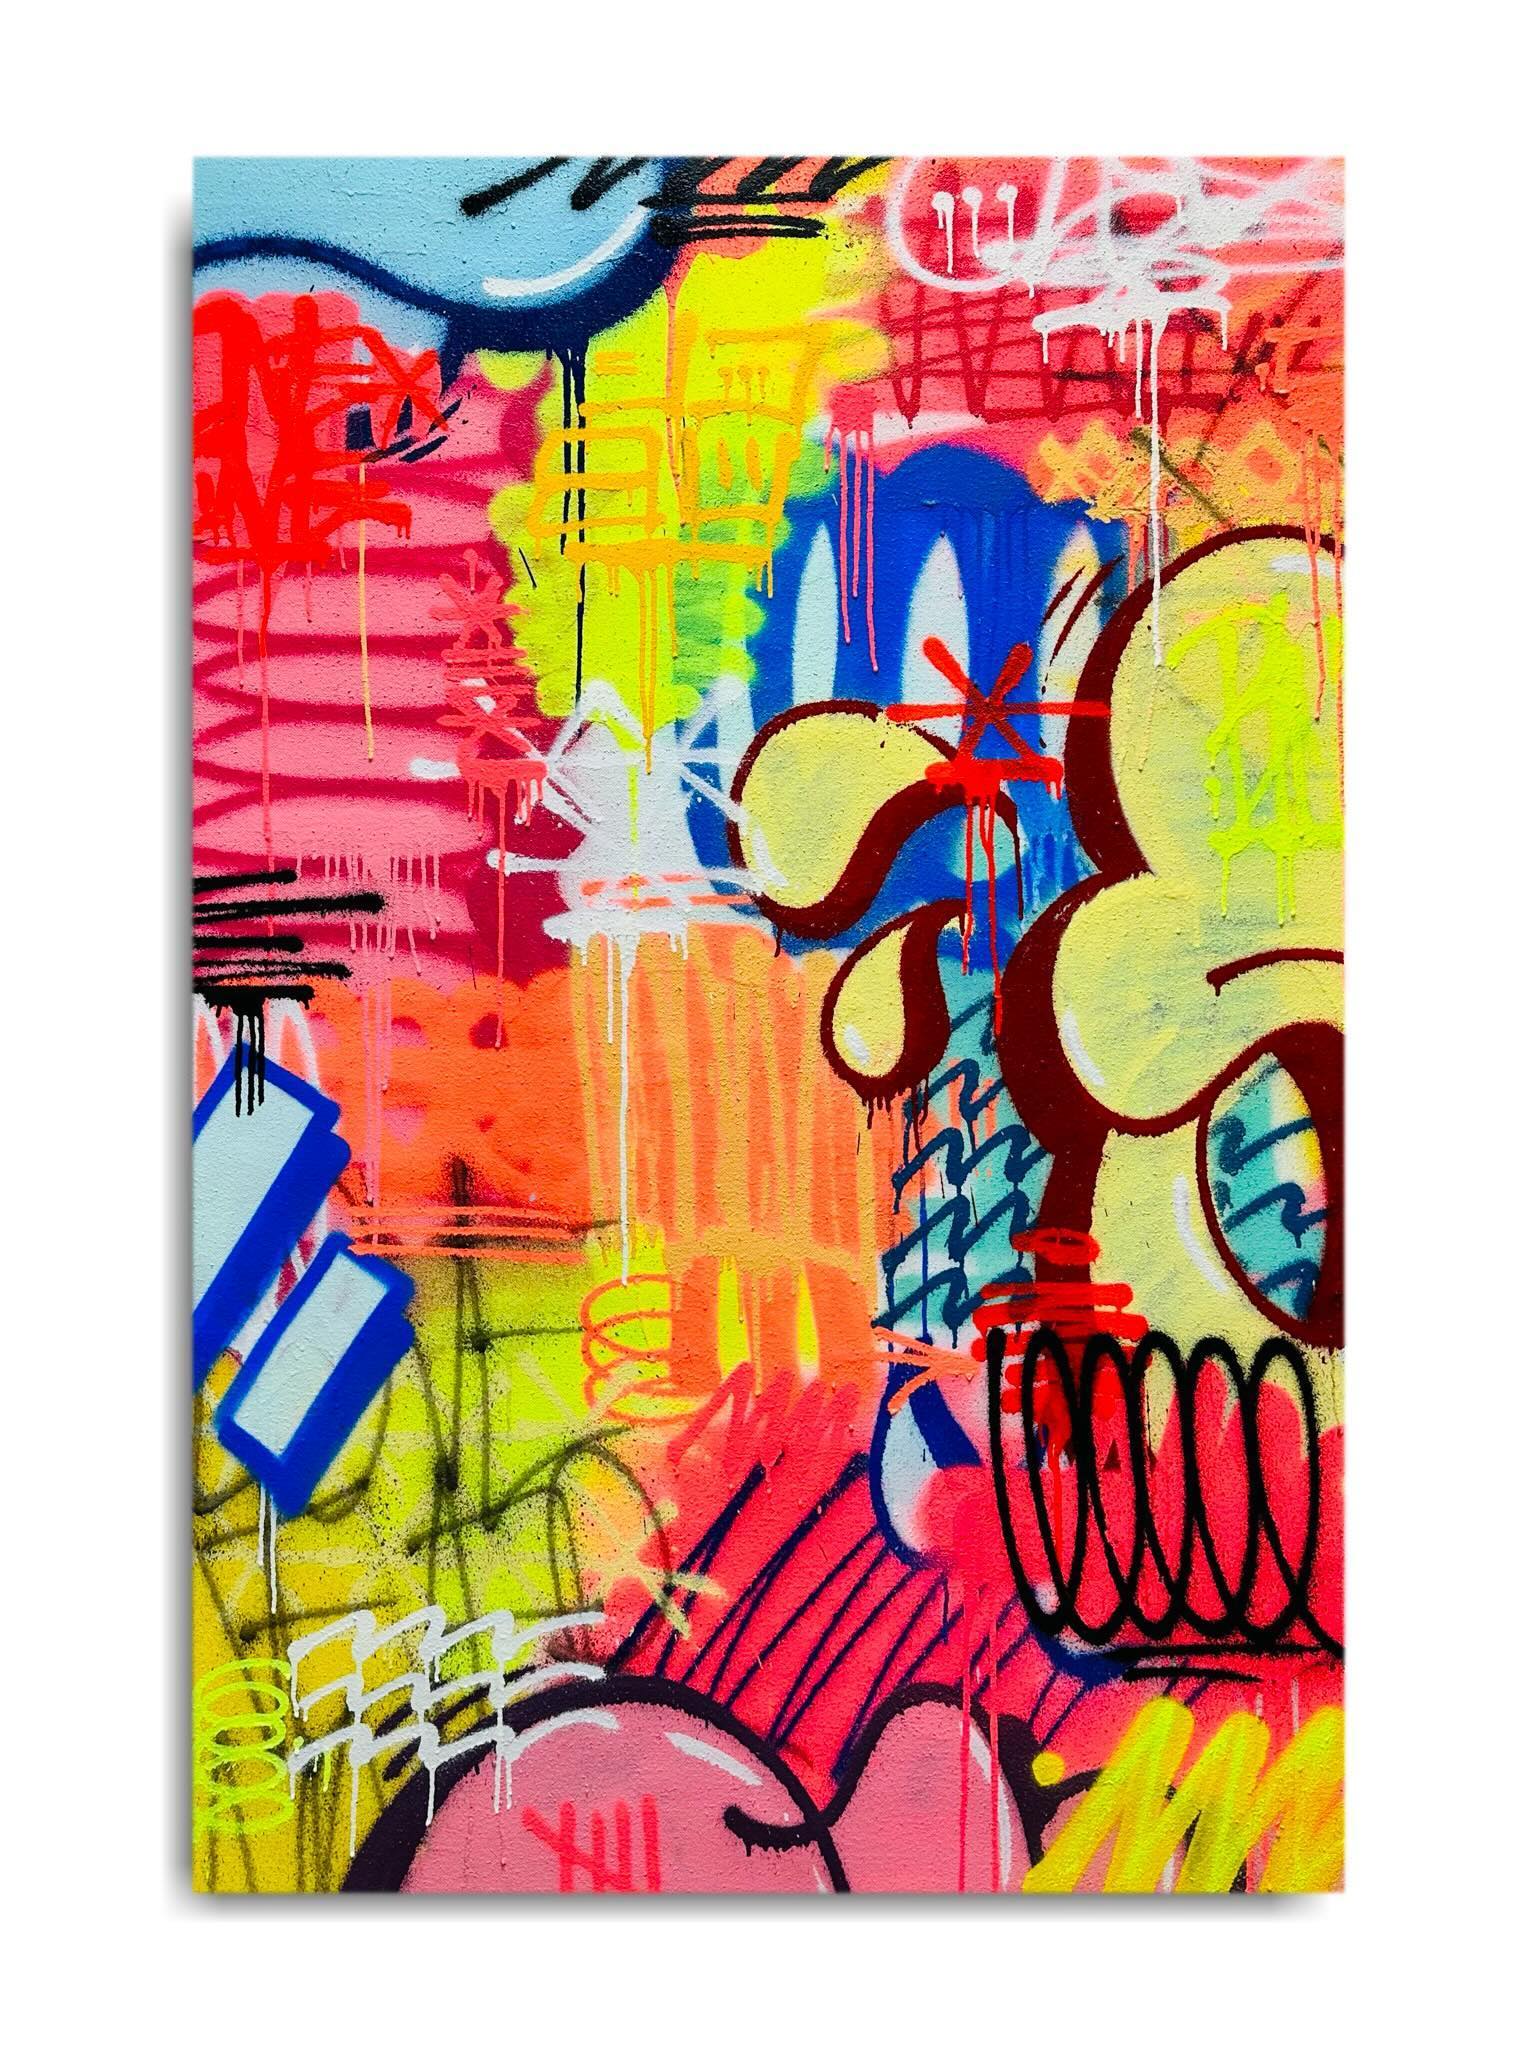 150 x 100 cm colurful graffiti artowkr on canvase by french artist Sven 